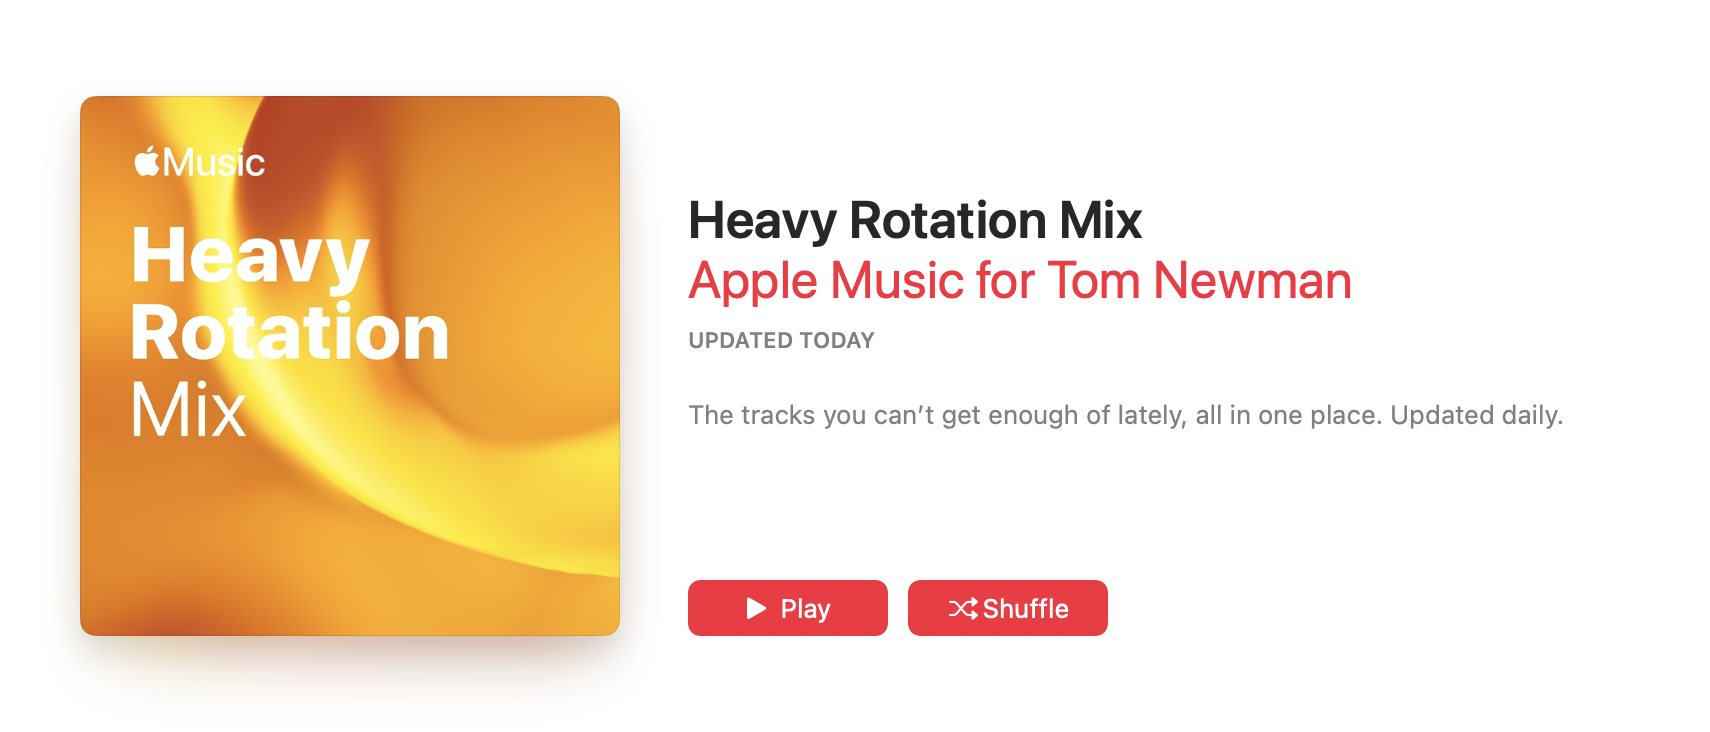 Apple Music launches new ‘Heavy Rotation Mix’ playlist